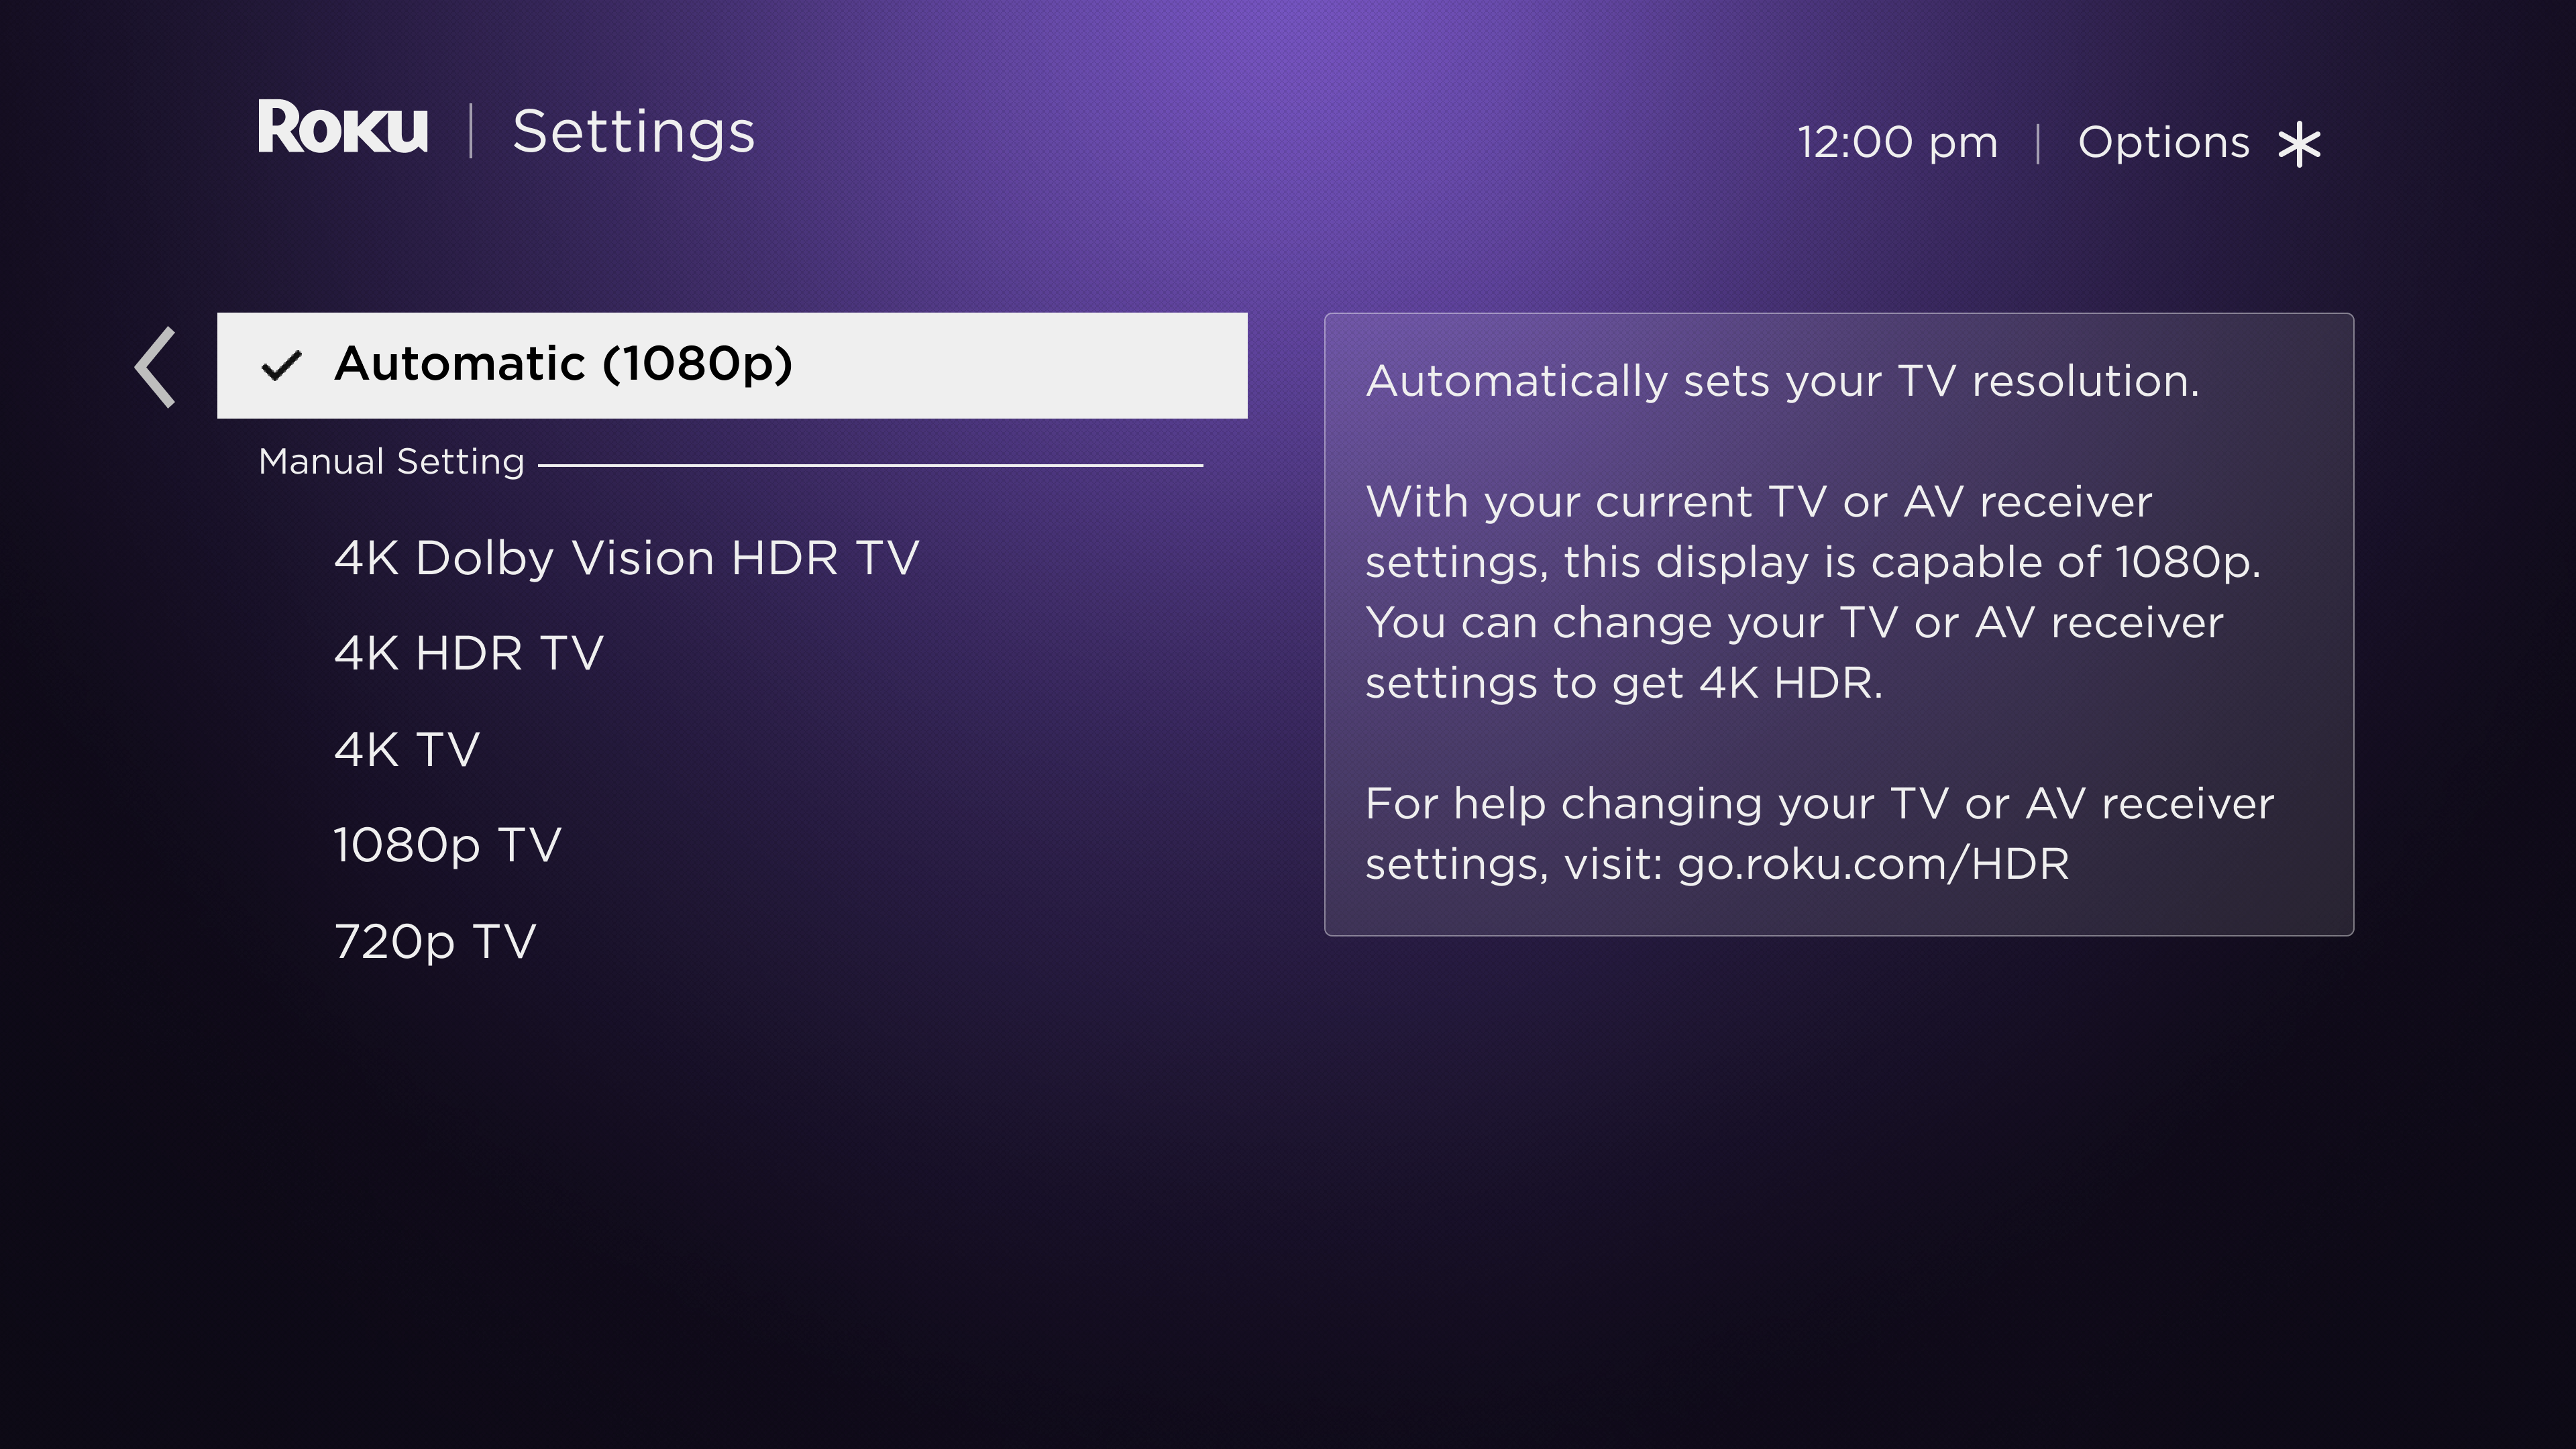 TCL Roku TV Manual: Top 10 Frequently Asked Questions to Answer